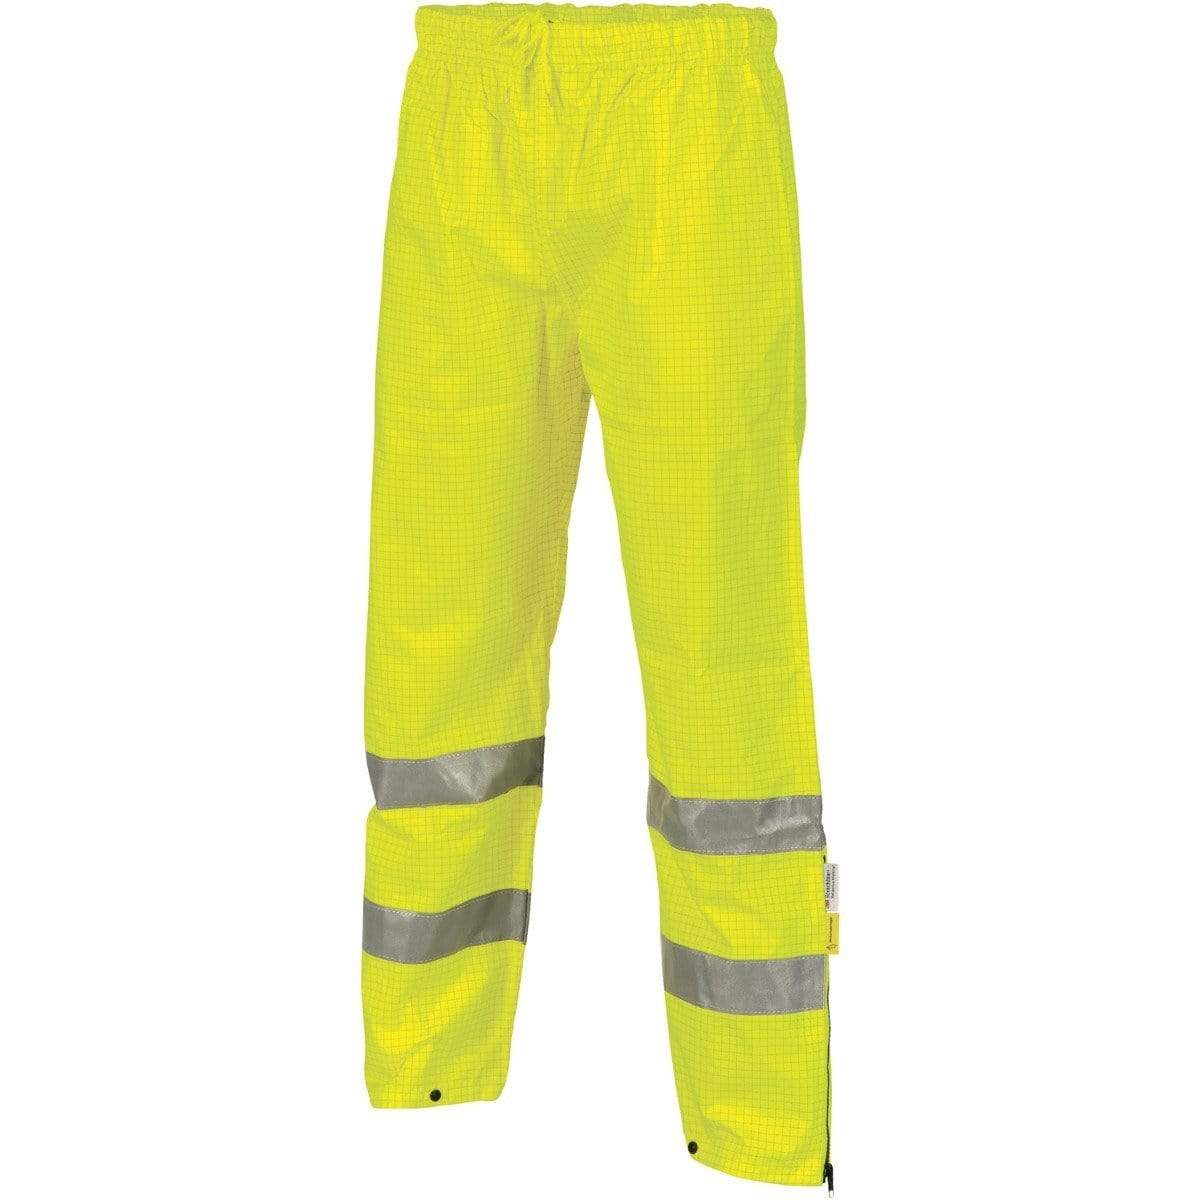 Dnc Workwear Hi-vis Breathable And Anti-static Pants With 3m Reflective Tape - 3876 Work Wear DNC Workwear Yellow S 